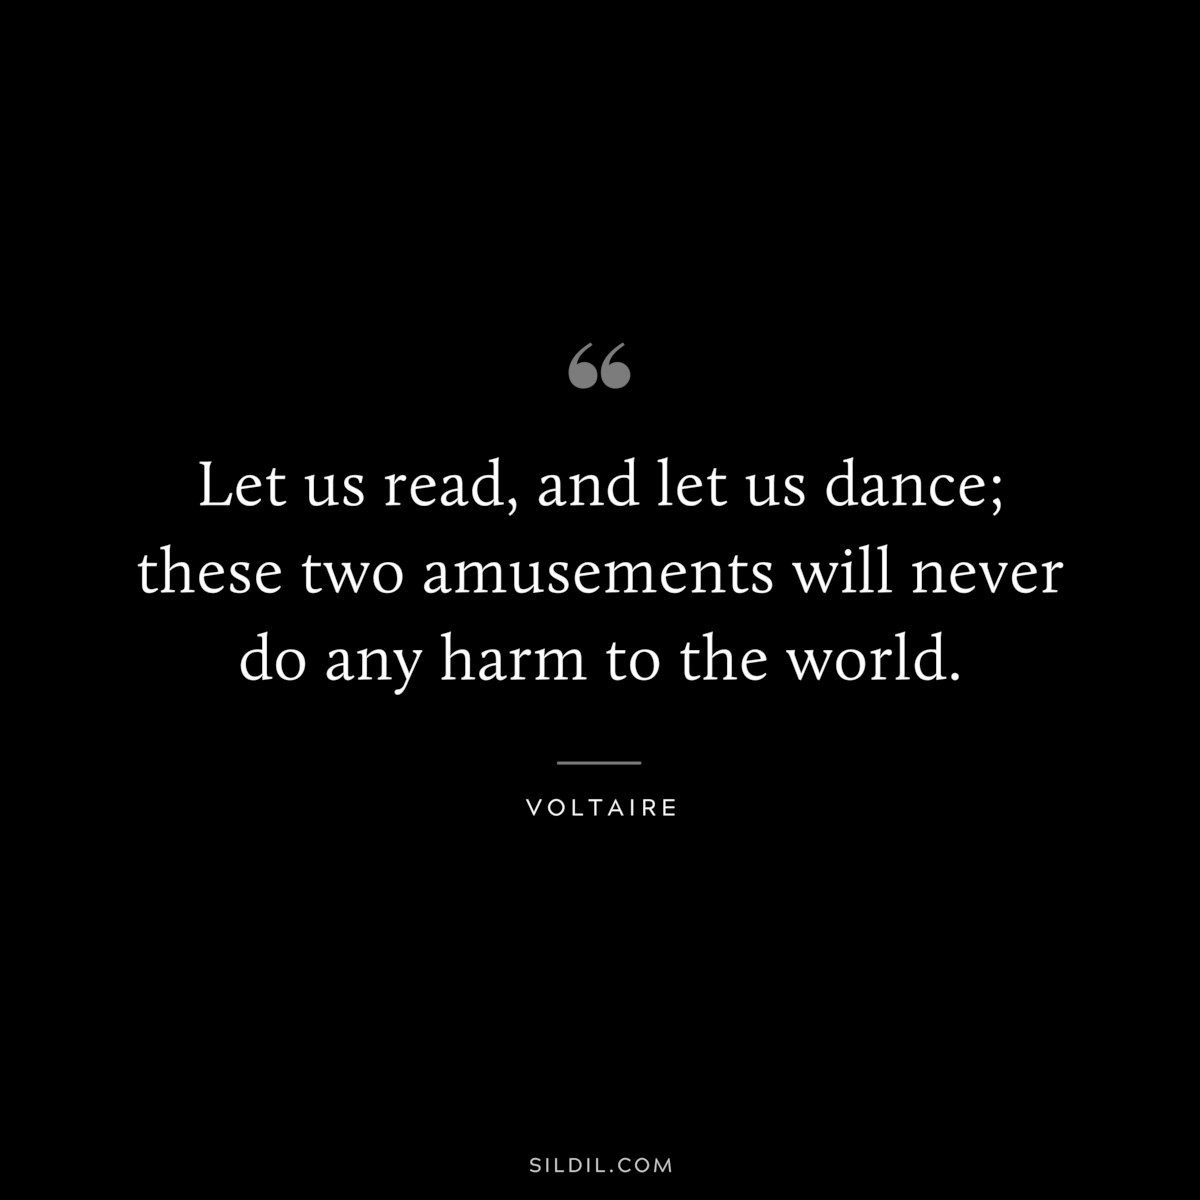 Let us read, and let us dance; these two amusements will never do any harm to the world. ― Voltaire